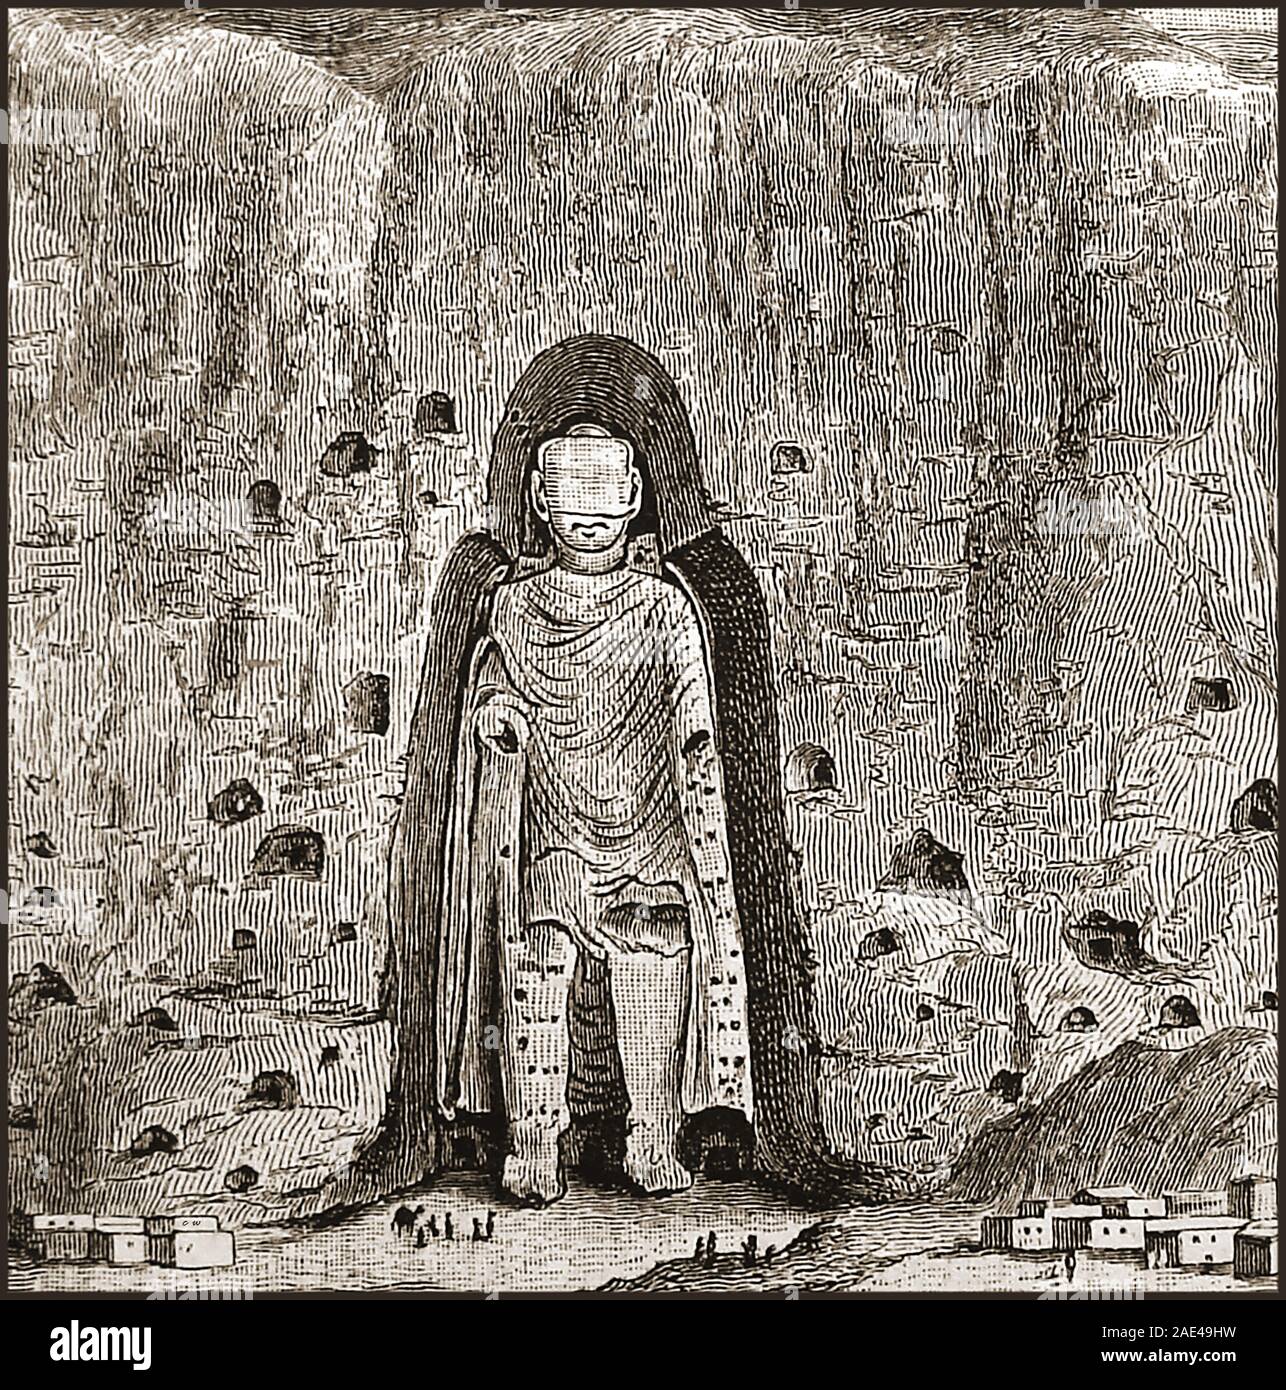 An historic 1888 image of the the former largest Giant standing rock cut figure of Buddha at Bamian  / Bamiyan / Bamyan, Afghanistan. This and the smaller  statue were dynamited and destroyed in March 2001 by the Taliban, because (allegedly)  they were declared as  idols. The face in the picture is blank because the fine features modelled in clay had long since deteriorated. The indentations in the rocks are caves in which hermits once lived. Stock Photo